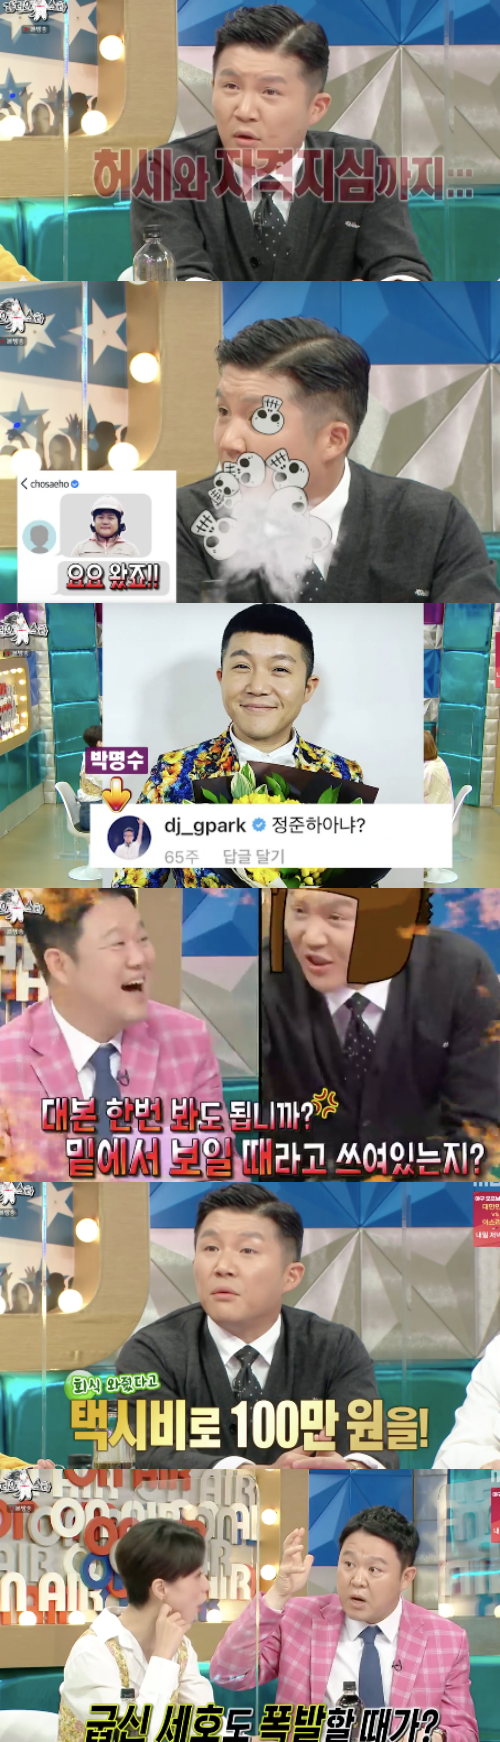 Among the various Episodes in Radio Star, Lee Hye-jung showed off his brilliant dedication from anecdote to diet myth that he made his debut in Vinsenzo thanks to Song Joong-ki.On MBC entertainment Radio Star, which aired on the 28th, comedian Jo Se-ho, singer Chan Hyuk, model Lee Hye-jung, and domestic No. 1 stylist Kim Sung-il appeared.Jo Se-ho reappeared in four years and laughed at the new nickname, saying, Jansen vaccine was hit and Jansenzo.I was given a vaccine and the doctor asked me to eat properly, so I bought a lot of bread, said Jo Se-ho, who had been dieting. But my father told me to avoid bread after vaccination, and I told him to avoid carbohydrates, he said.Jo Se-ho said, I am surprised to stop eating bread and I am on a diet from the next time. Kim Gu said, Episode is a little bit like that. Jo Se-ho laughed at the How is it funny with vaccine?Jo Se-ho, who also launched the jeans brand as a fashion CEO, said, I have been wearing my cardigan.I had a sense of bravado and qualification, he said. But now I want to go to the feeling of French chic. Fashion philosophy was revealed, especially fashion muse.Jo Se-ho also said that he weighed 99.8 kilograms during cabbage and now he is 70 kilograms.I asked if I had been sending my old picture with DM and asked if I had been in Yoyo, but I havent come yet, said Jo Se-ho, who had lost 30 kilos.I also asked about the sum of my gag woman Kim Seung-hye.When asked if his mind was true at the time, he said, I was sincere, but I was ignorant and clumsy. He said, I misunderstood because it was an entertaining approach, and I thought that the proposal for meals would come later because I was a senior.I asked Jo Se-hos ideal type.If you are a reason like Nam Chang-hee, you should not play with him, but you are the best person to play with, and you have a story that says Nam Chang-hee, and Seokcheons brother called you. The real ideal is a person who understands funny people and fashion when playing like Yoo Se-yoon, but all of them are Nam Chang-hee, he said.I will start breathing for about 6 seconds, said Akmu Chanhyuk, calmly starting, I will take it to my pace.Trans is a style that can be used to these days, he said in his own style.I kept talking about fashion.Chan Hyuk said, I always prefer fashion that I do not regret, and I do not like fashion. He said, I do not wear it, I like fashion that I can wear over decades.Chan Hyuk also said that he would not go out without work, saying, I can not go out without a mirror these days, and I installed a mirror for each purpose at home. The completion of fashion is possible by looking at shoes and full body silhouettes.I mentioned the comeback of the believer and listener, and said that I completely broke the frame.Chan Hyuk said, I will not feel new, and I will try to free myself from transcendence with musicians who represent this era, such as Cholraber, Lee Sun Hee, IU, Binzino, Crush, Gianti, and Jannabi.In particular, he said, It has been a long time since I changed from a bad musician to a bad musician. He said, I mean adults, not children, and I want to have an adult idea.Lee Hye-jung, a model and actor, introduced Actor Lee Hee-joon as a fifth year of marriage and said he made his drama debut with Vinsenzo.Lee Hye-jung said, My husband, who is close to Song Joong-ki, knew that I was acting and recommended it to the director. I was contacted in the middle of the day when I was red because of stress due to childcare.In particular, he shot up to 3 am at the first drama shooting site, and he said, I took it, but I was grateful to wait for me to wait for me to finish my first film.Lee Hye-jung also said she was late for modeling, and she was later than others because she had been a basketball player for 12 years.However, he made his debut at a high speed in two months after attending the model academy.When asked about the difficulty of model life, he said, It was hard to fix the posture. He was surprised to say that he weighed 80 kilos during basketball players and was impressed by 47 kilograms during the model.Lee Hye-jung said he had health problems and said, I did not know it, but I was almost postmenopausal because I came to Korea for three years.Lee Hye-jung, who recalled wearing a corset costume that fits her body, said, I have been so tight that I have fainted. It is common to know, so I gave you candy and water.Capture the Radio Star screen